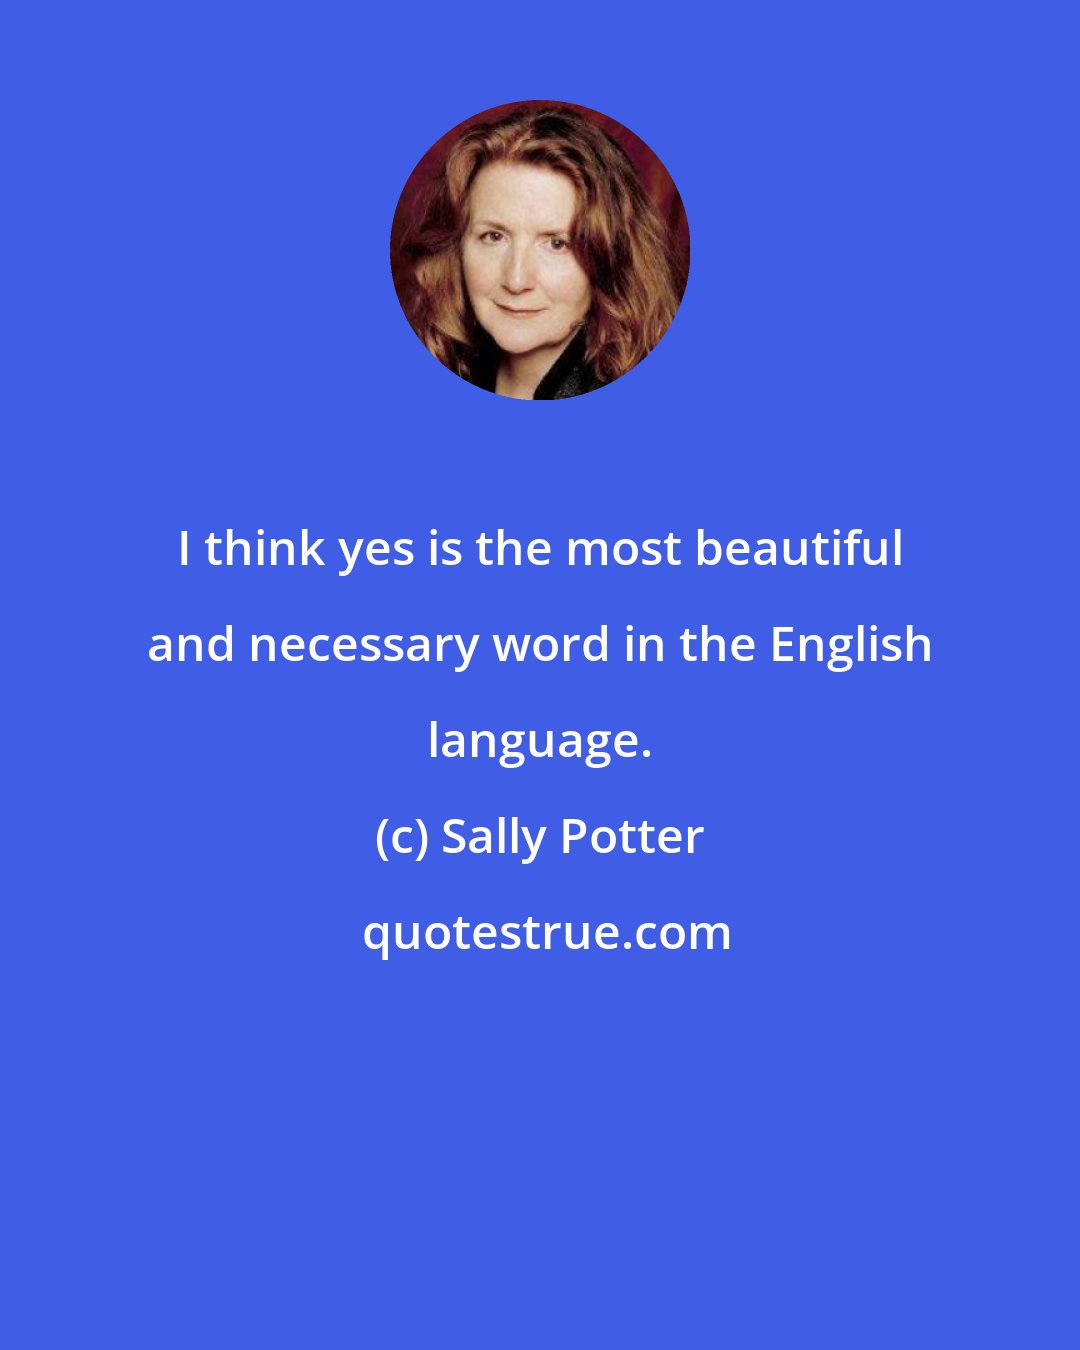 Sally Potter: I think yes is the most beautiful and necessary word in the English language.